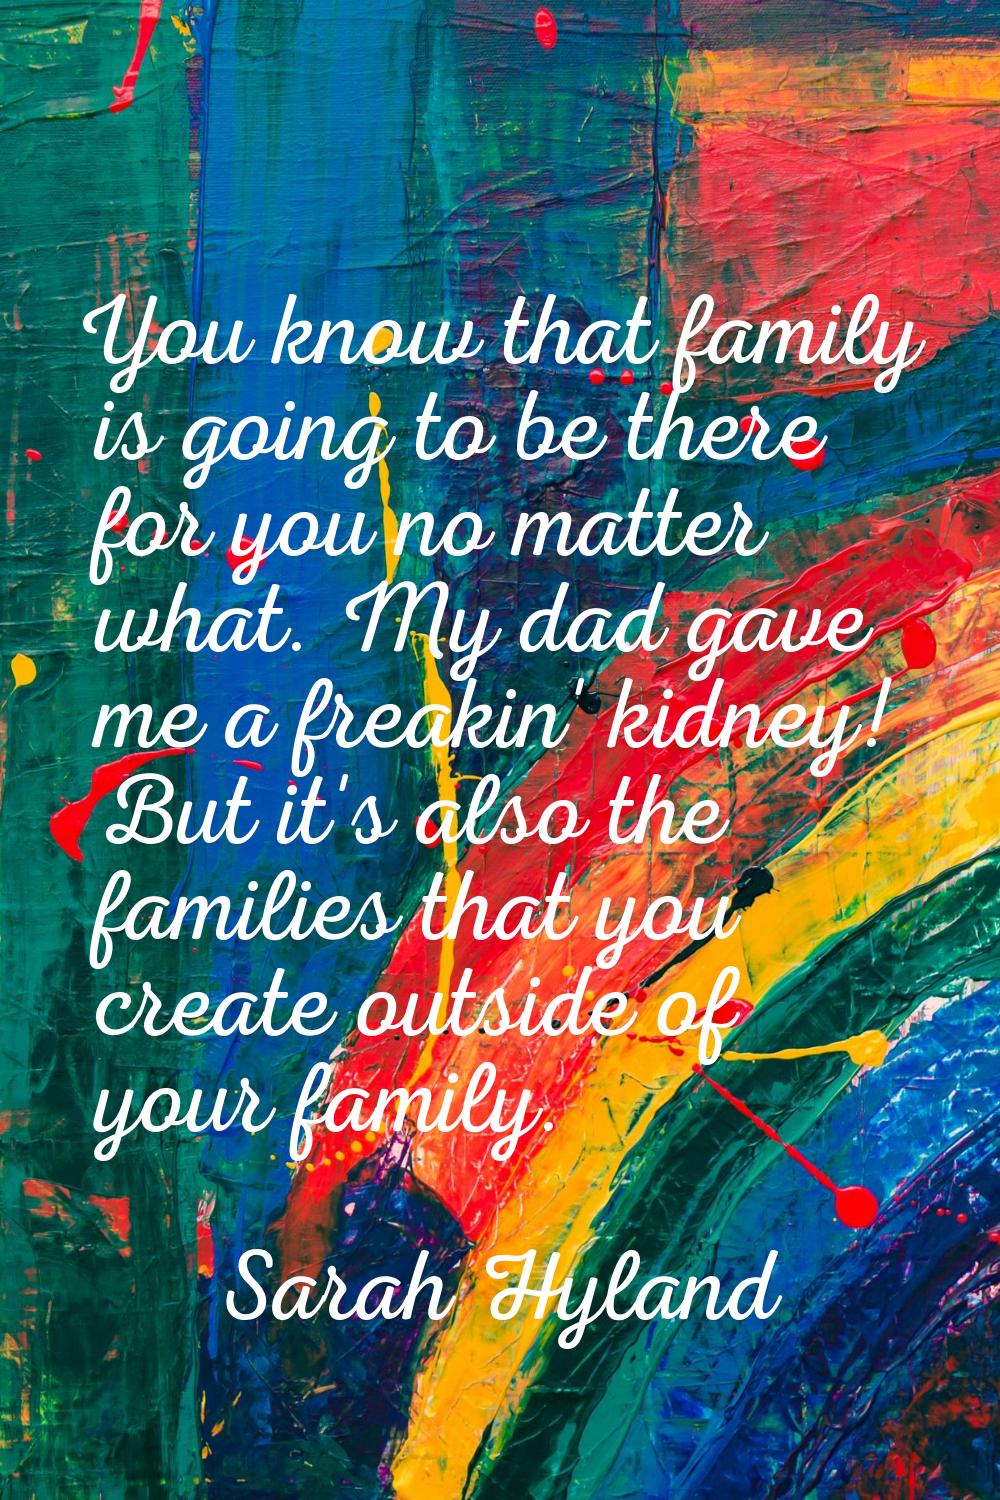 You know that family is going to be there for you no matter what. My dad gave me a freakin' kidney!